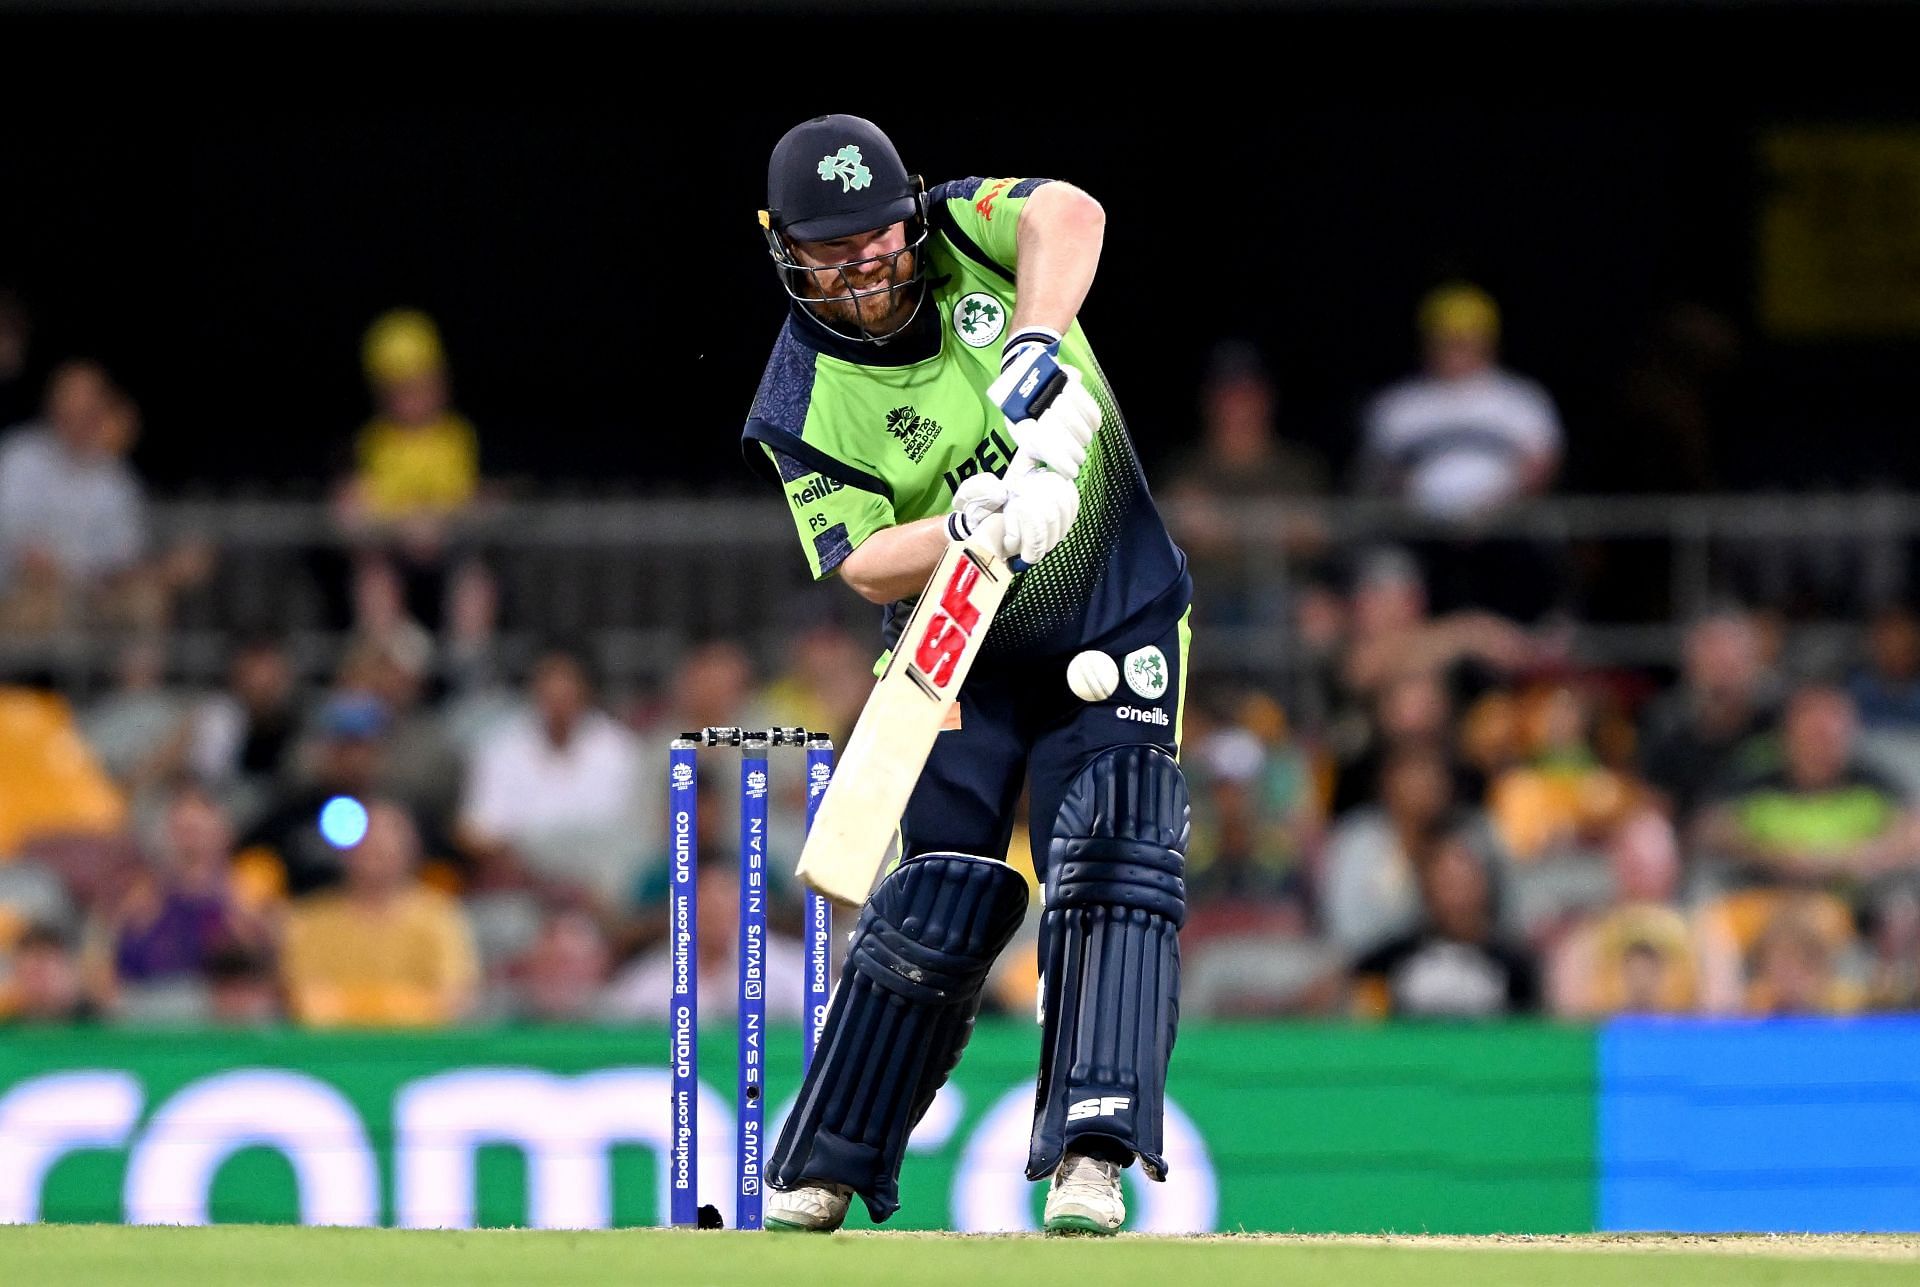 Paul Sirling&#039;s sensational hitting powered Ireland to 93-0 at the end of six overs